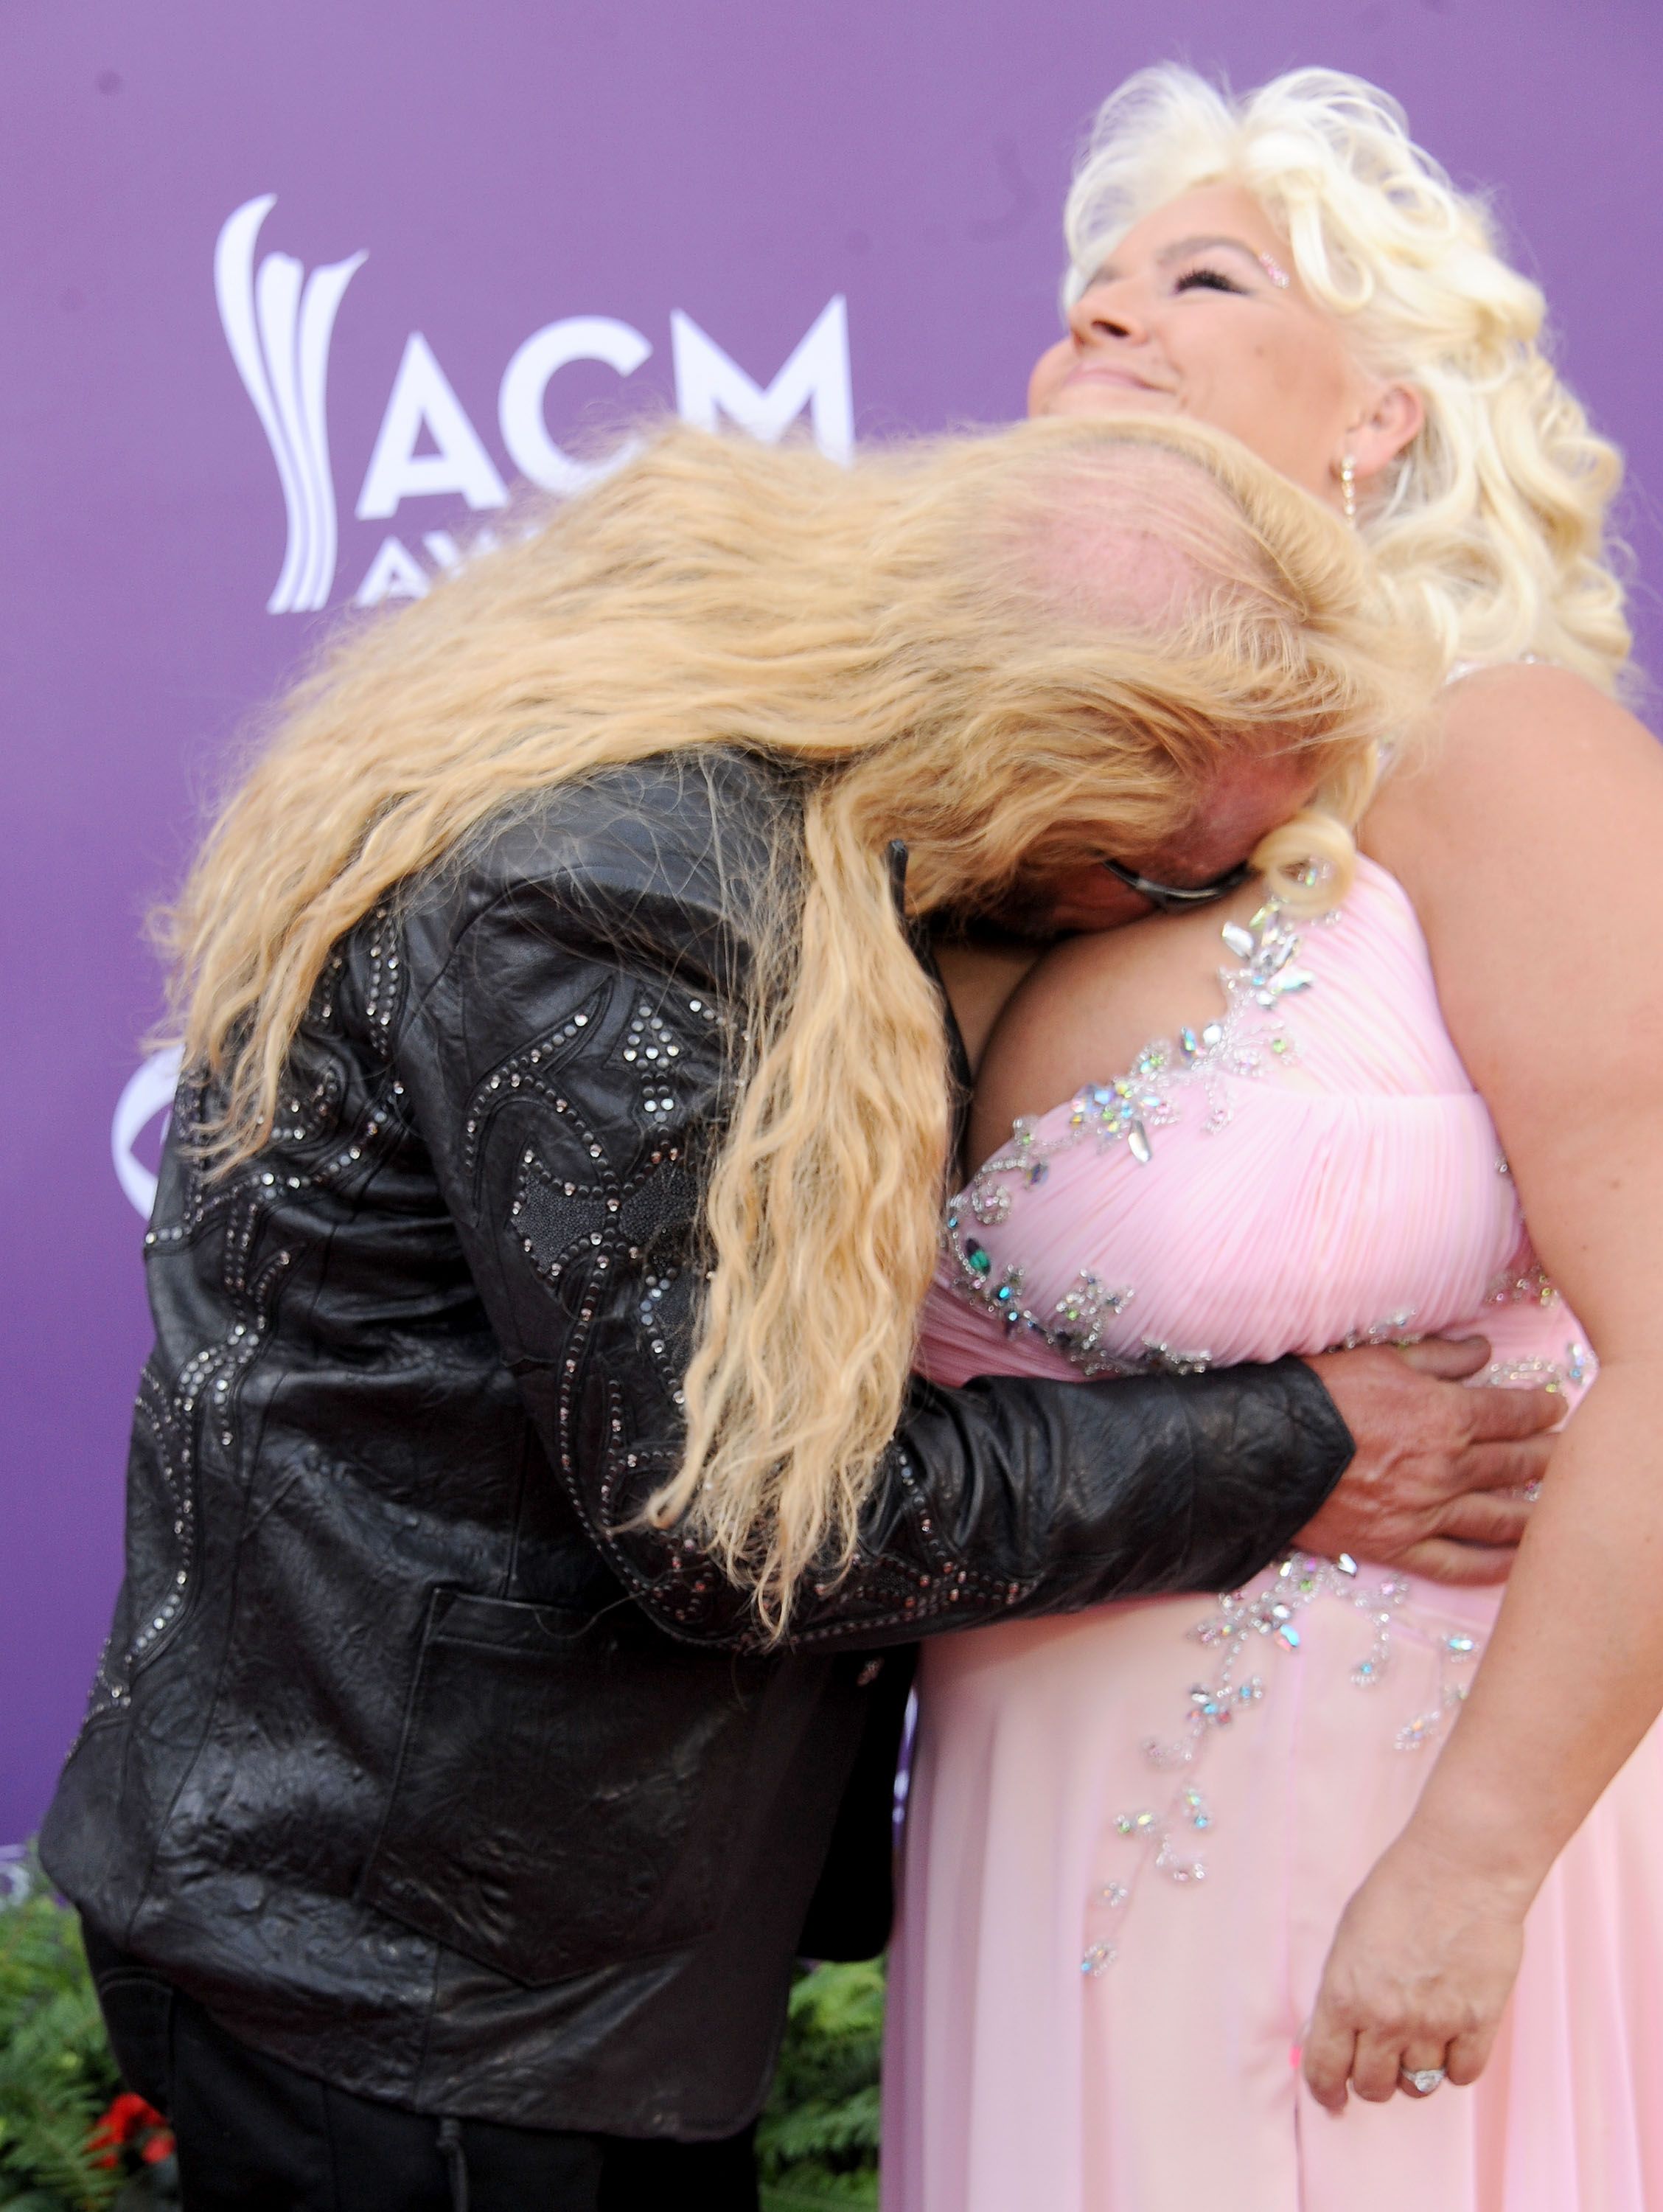 Dog Bounty Hunter gets amorous with wife